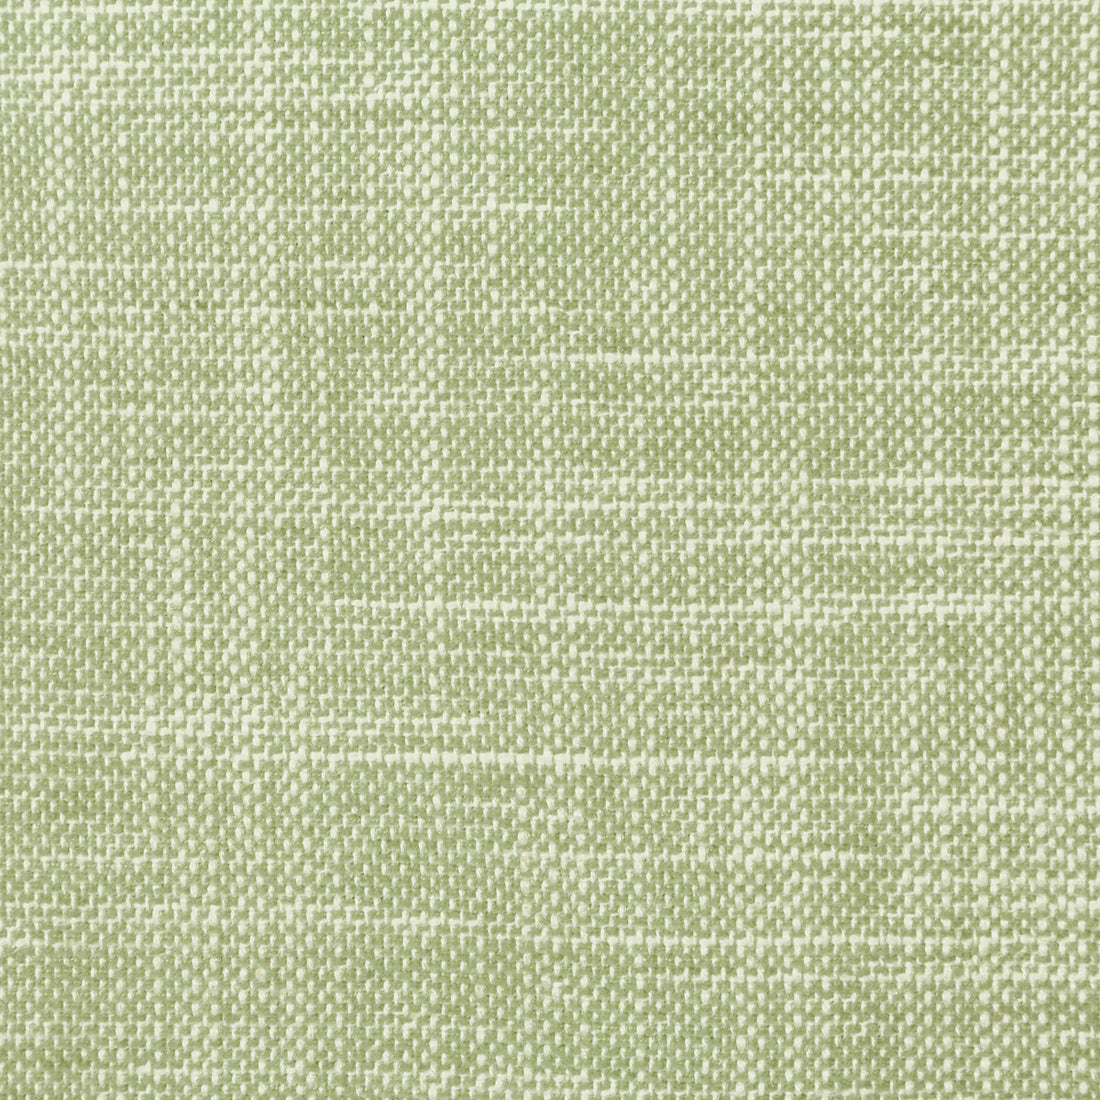 Okanda fabric in leaf color - pattern 35768.13.0 - by Kravet Smart in the Performance Kravetarmor collection